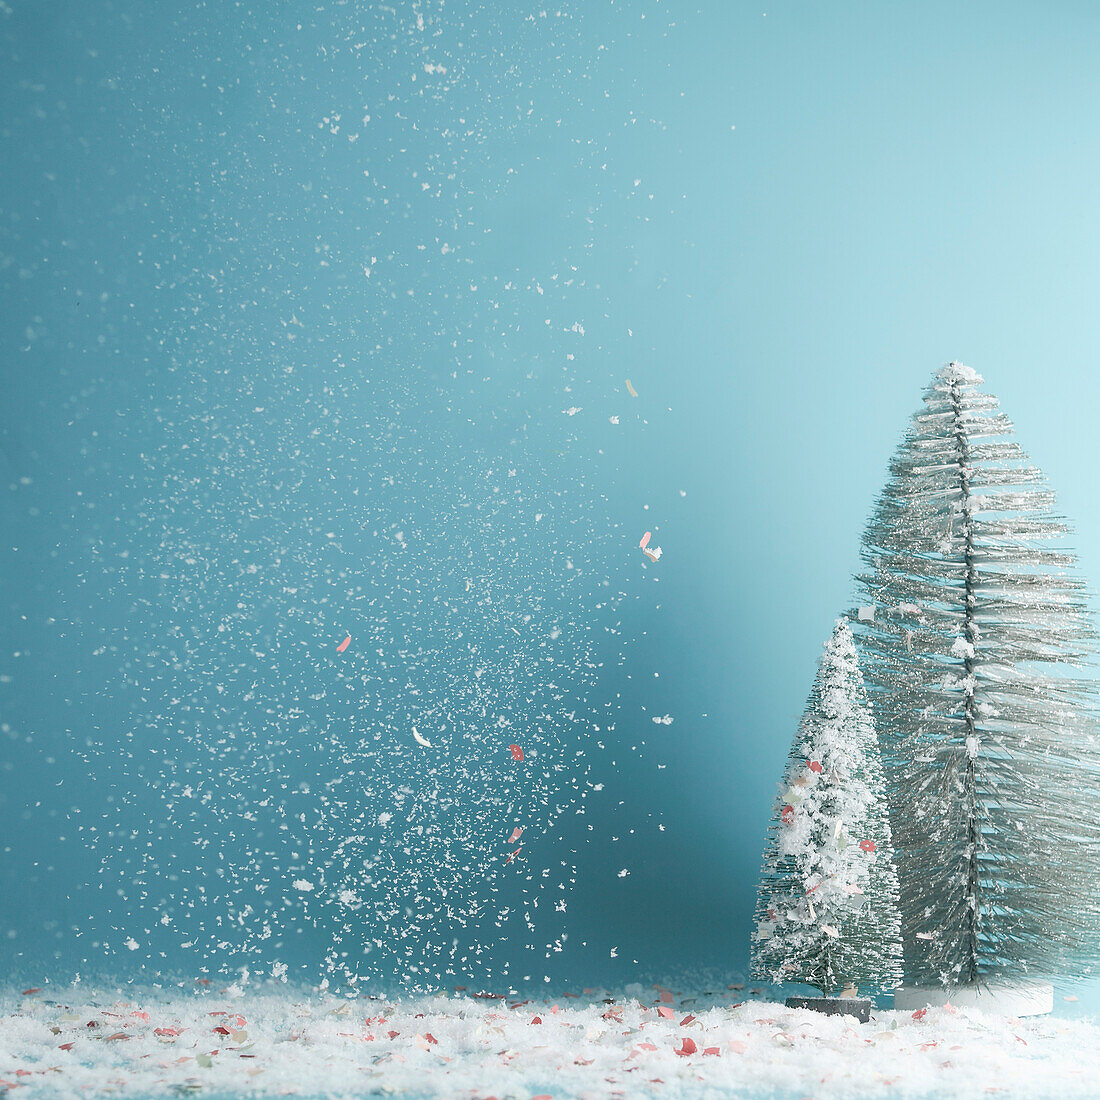 Winter, Christmas or New Year background with fir trees and falling snow at blue